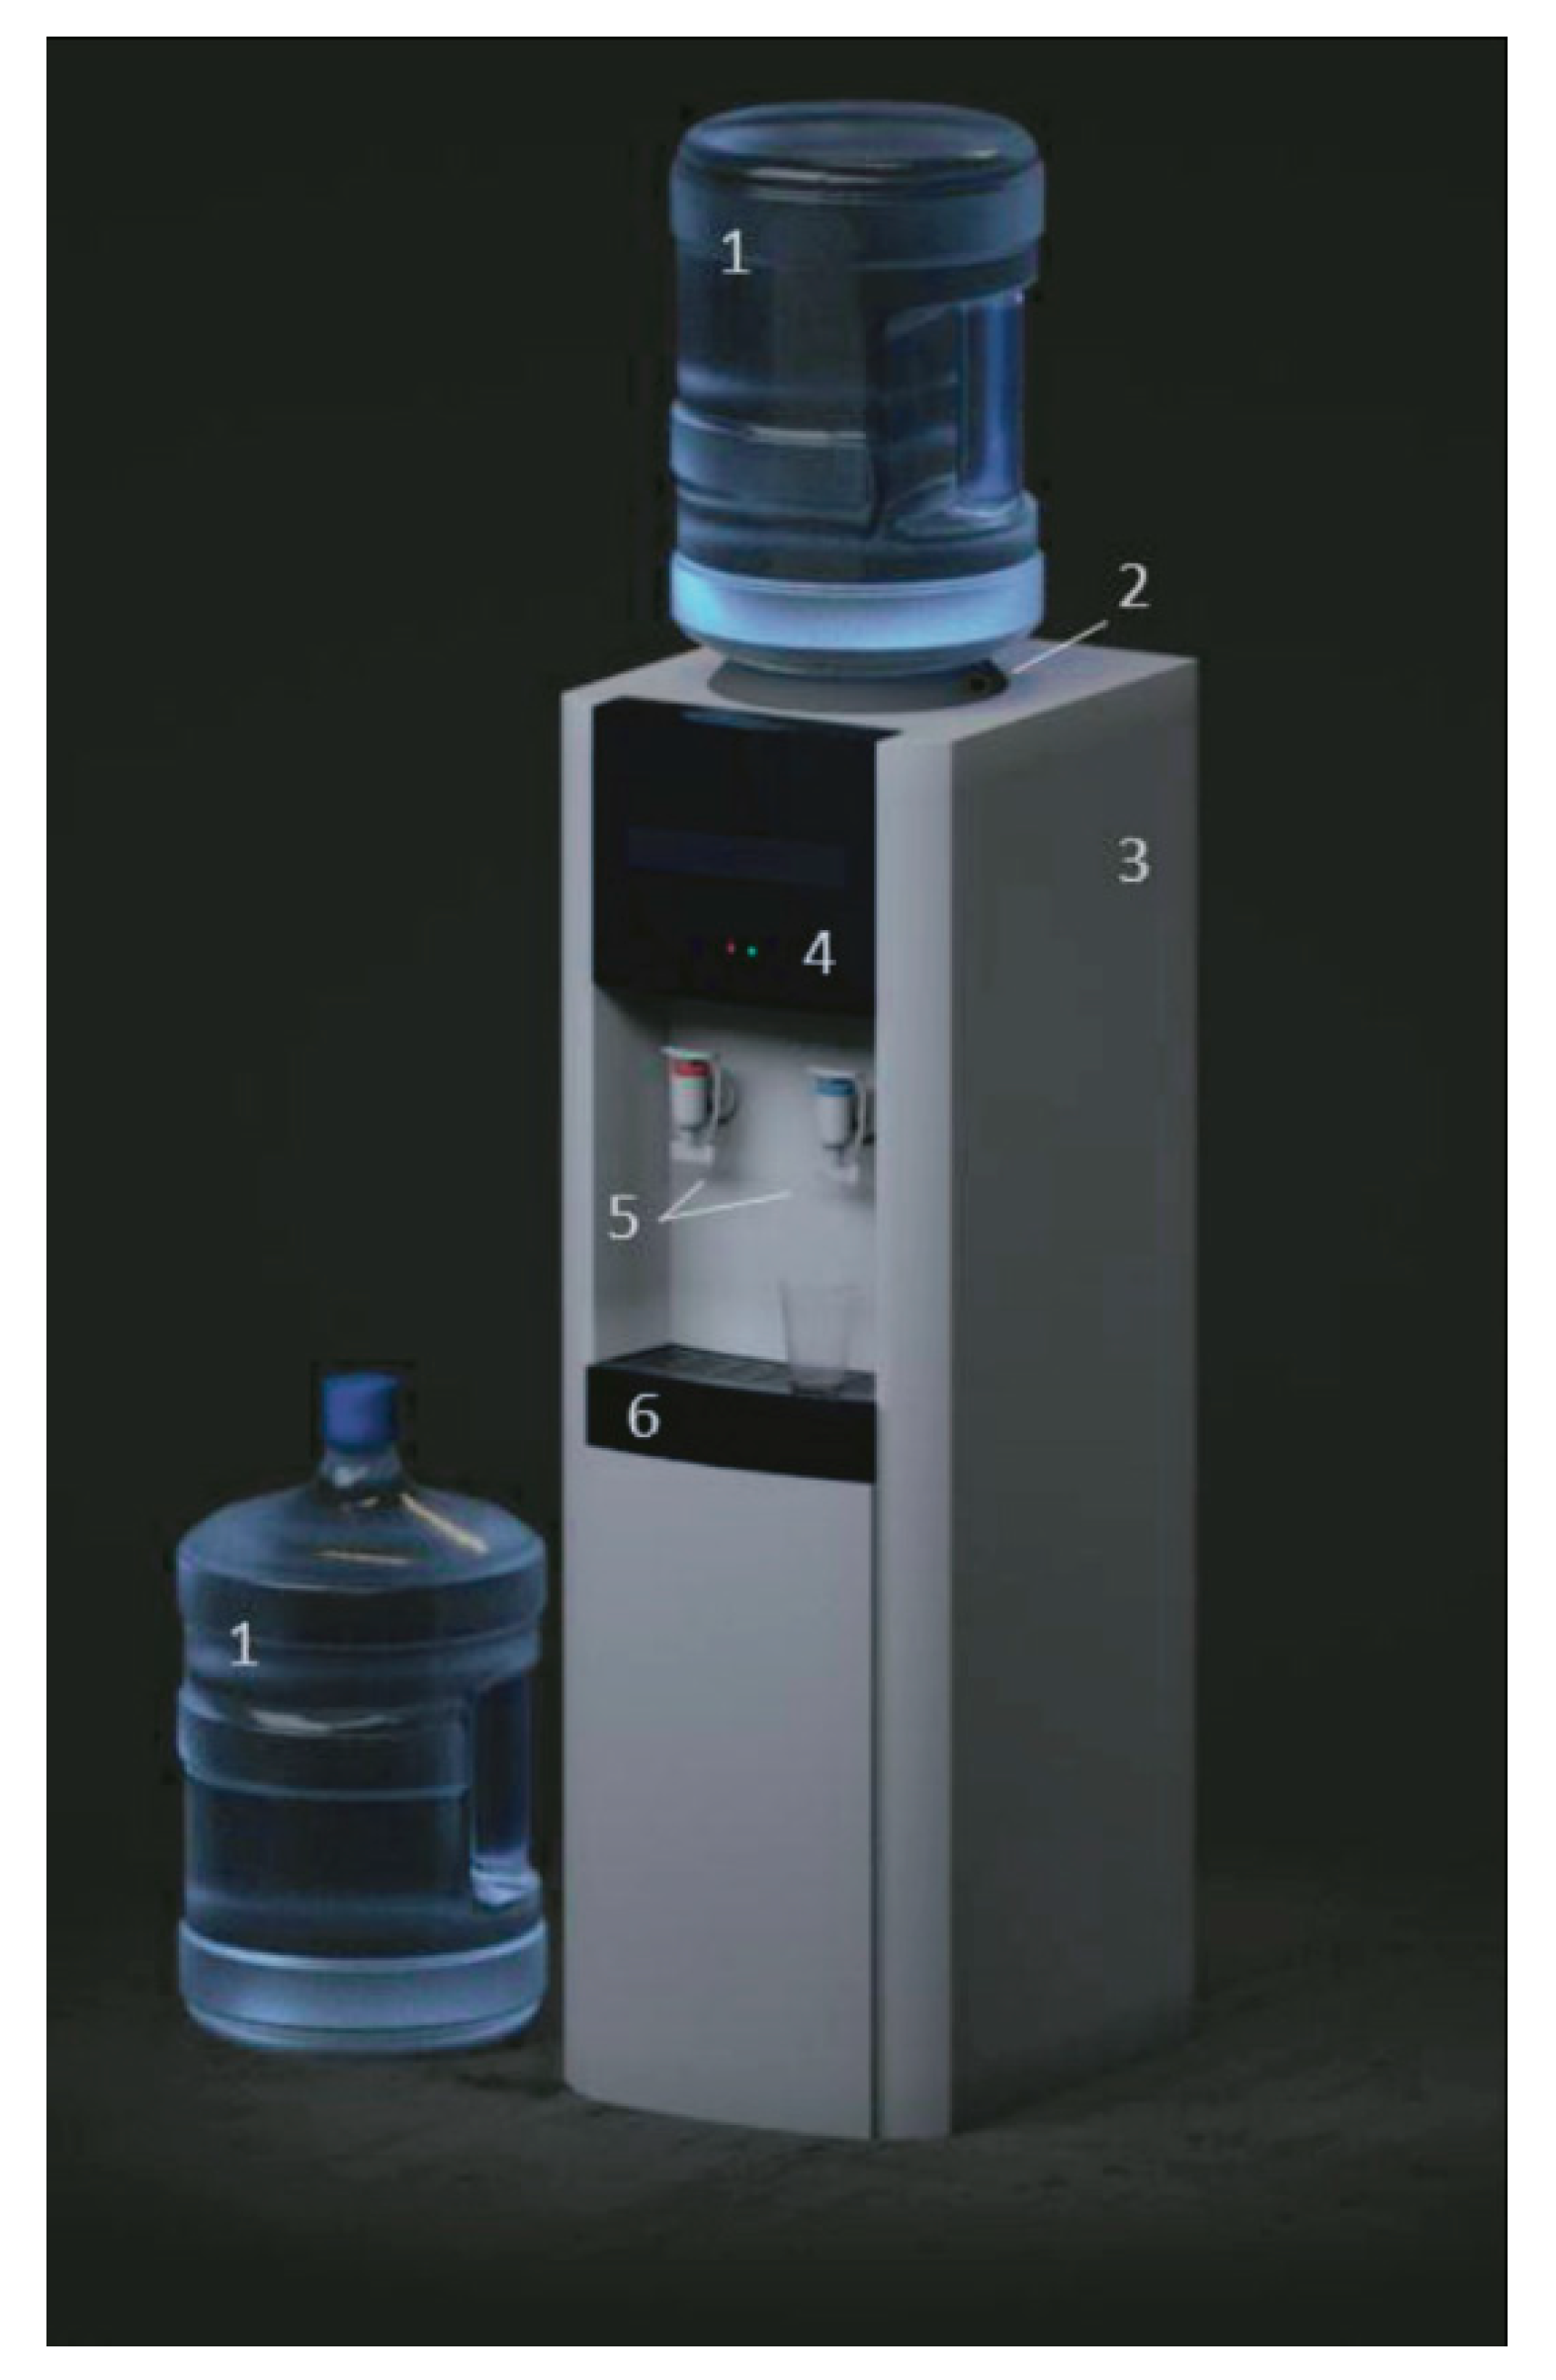 Hot & Cold Water Coolers  Bottled Water Delivery in MD, DC & VA